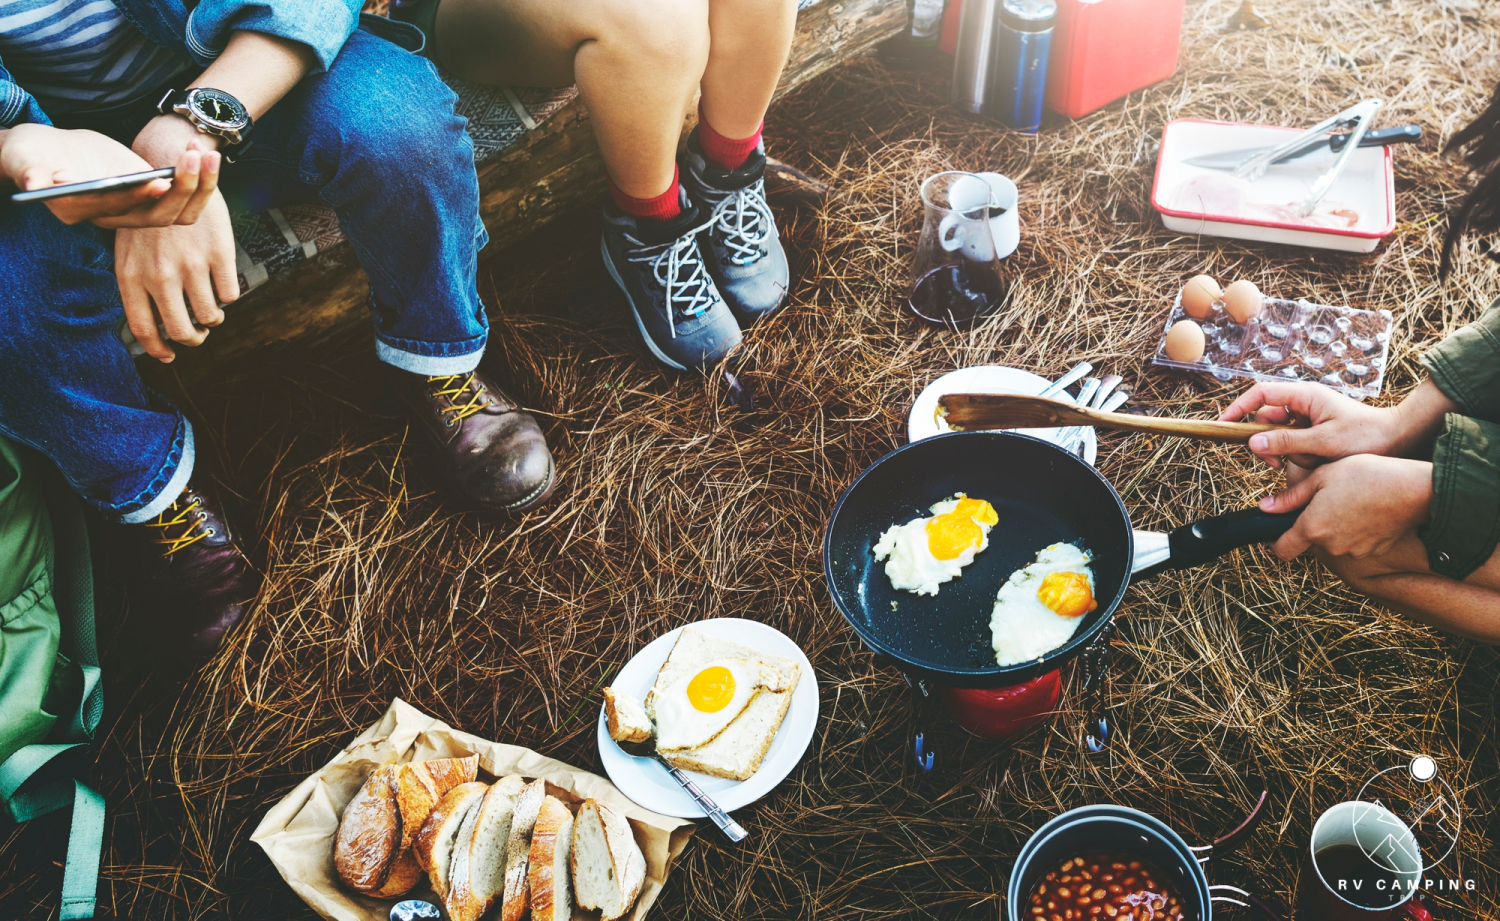 If you're an avid camper, you know that mealtime in the great outdoors can be just as important as the adventure itself.